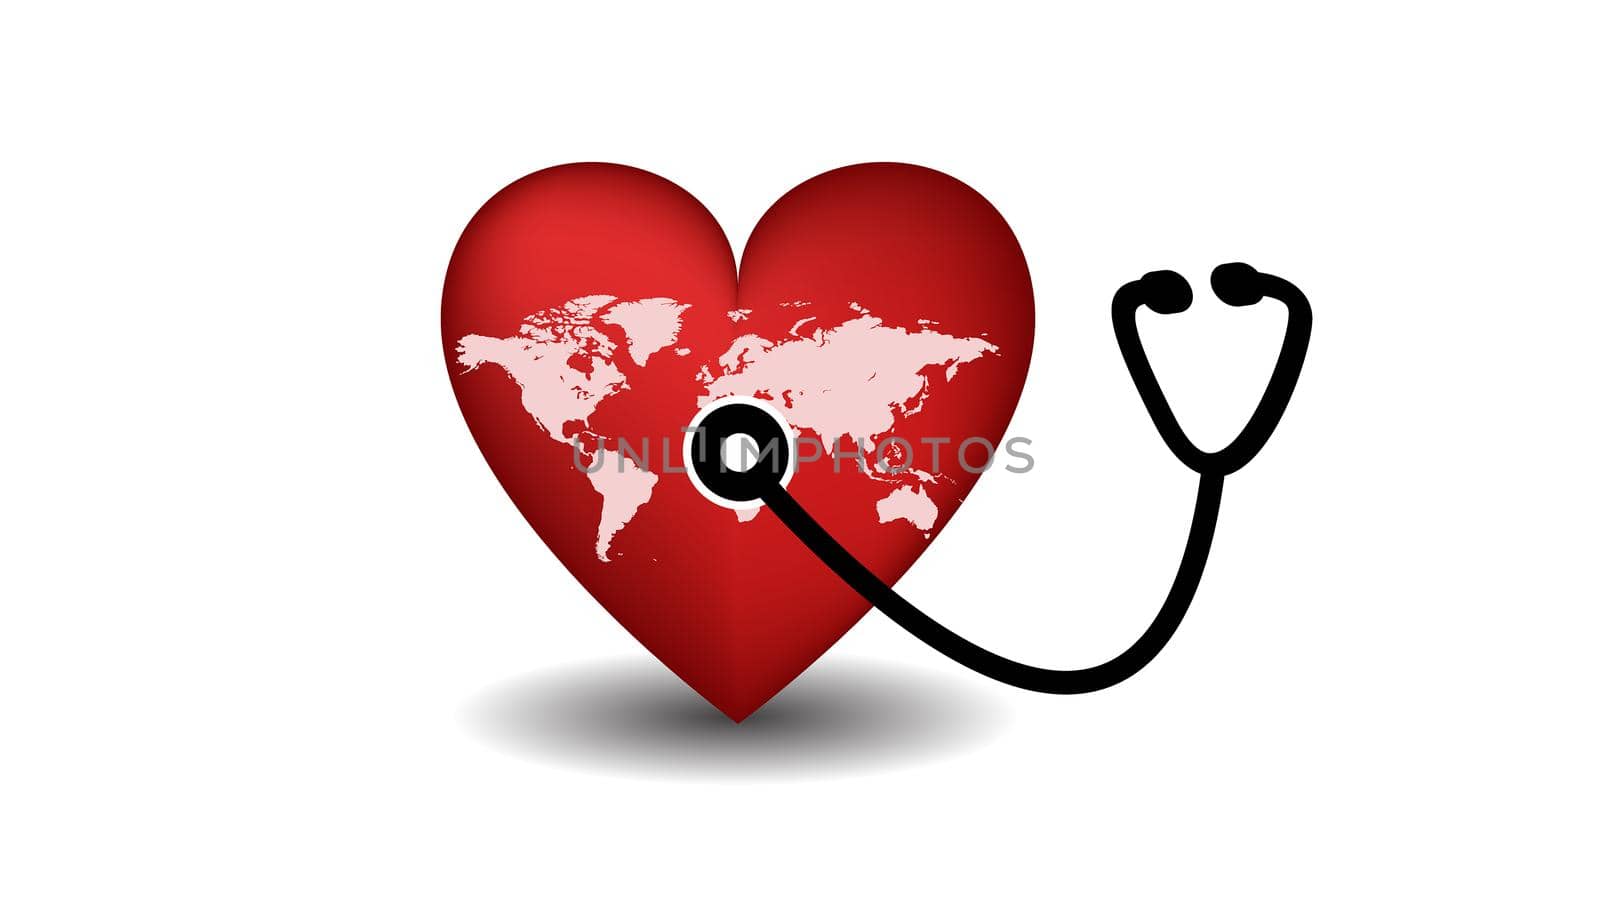 World Heart Day Heart with Stethoscope by sarayut_thaneerat